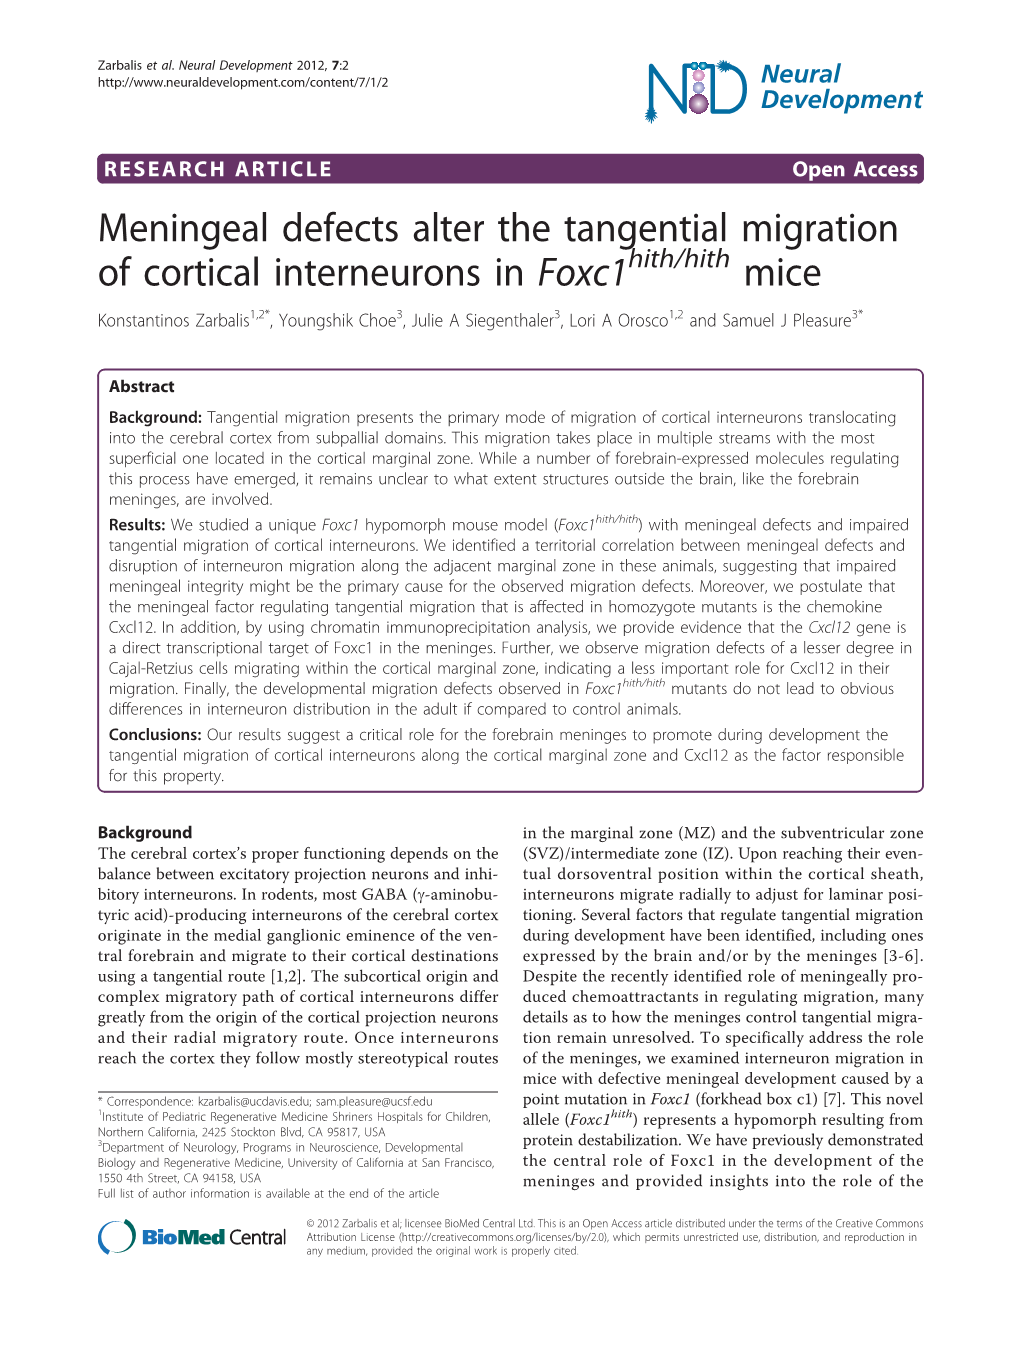 Meningeal Defects Alter the Tangential Migration Of